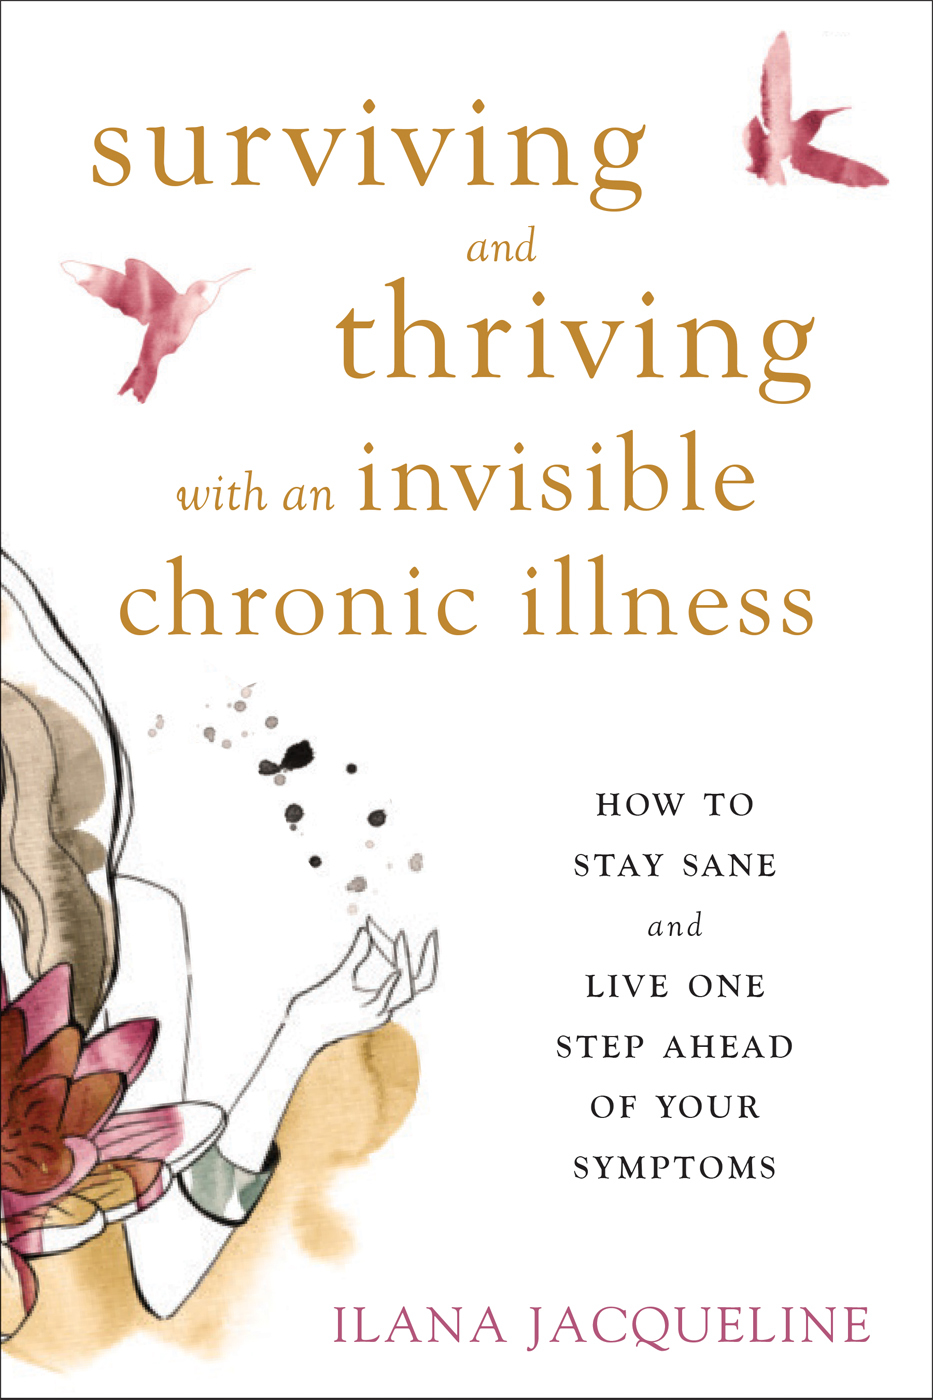 Ilana Jacqueline: Surviving and Thriving with an Invisible Chronic Illness (Paperback, 2018, ReadHowYouWant.com, Limited)